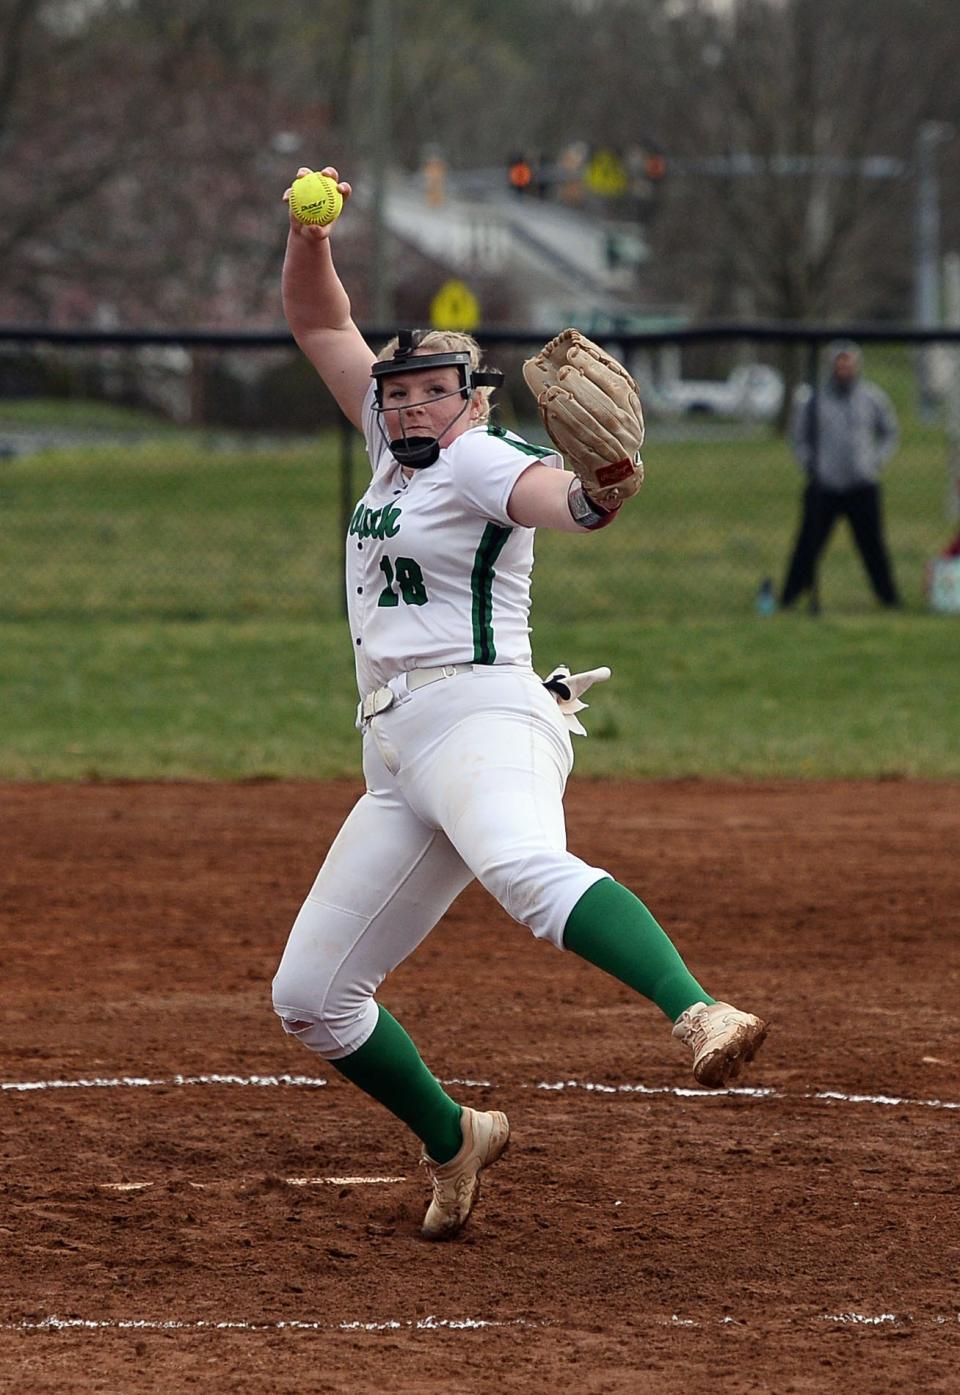 South Hagerstown senior Madi Wade, shown earlier this season against North Hagerstown, pitched a five-inning perfect game with 10 strikeouts against Smithsburg.